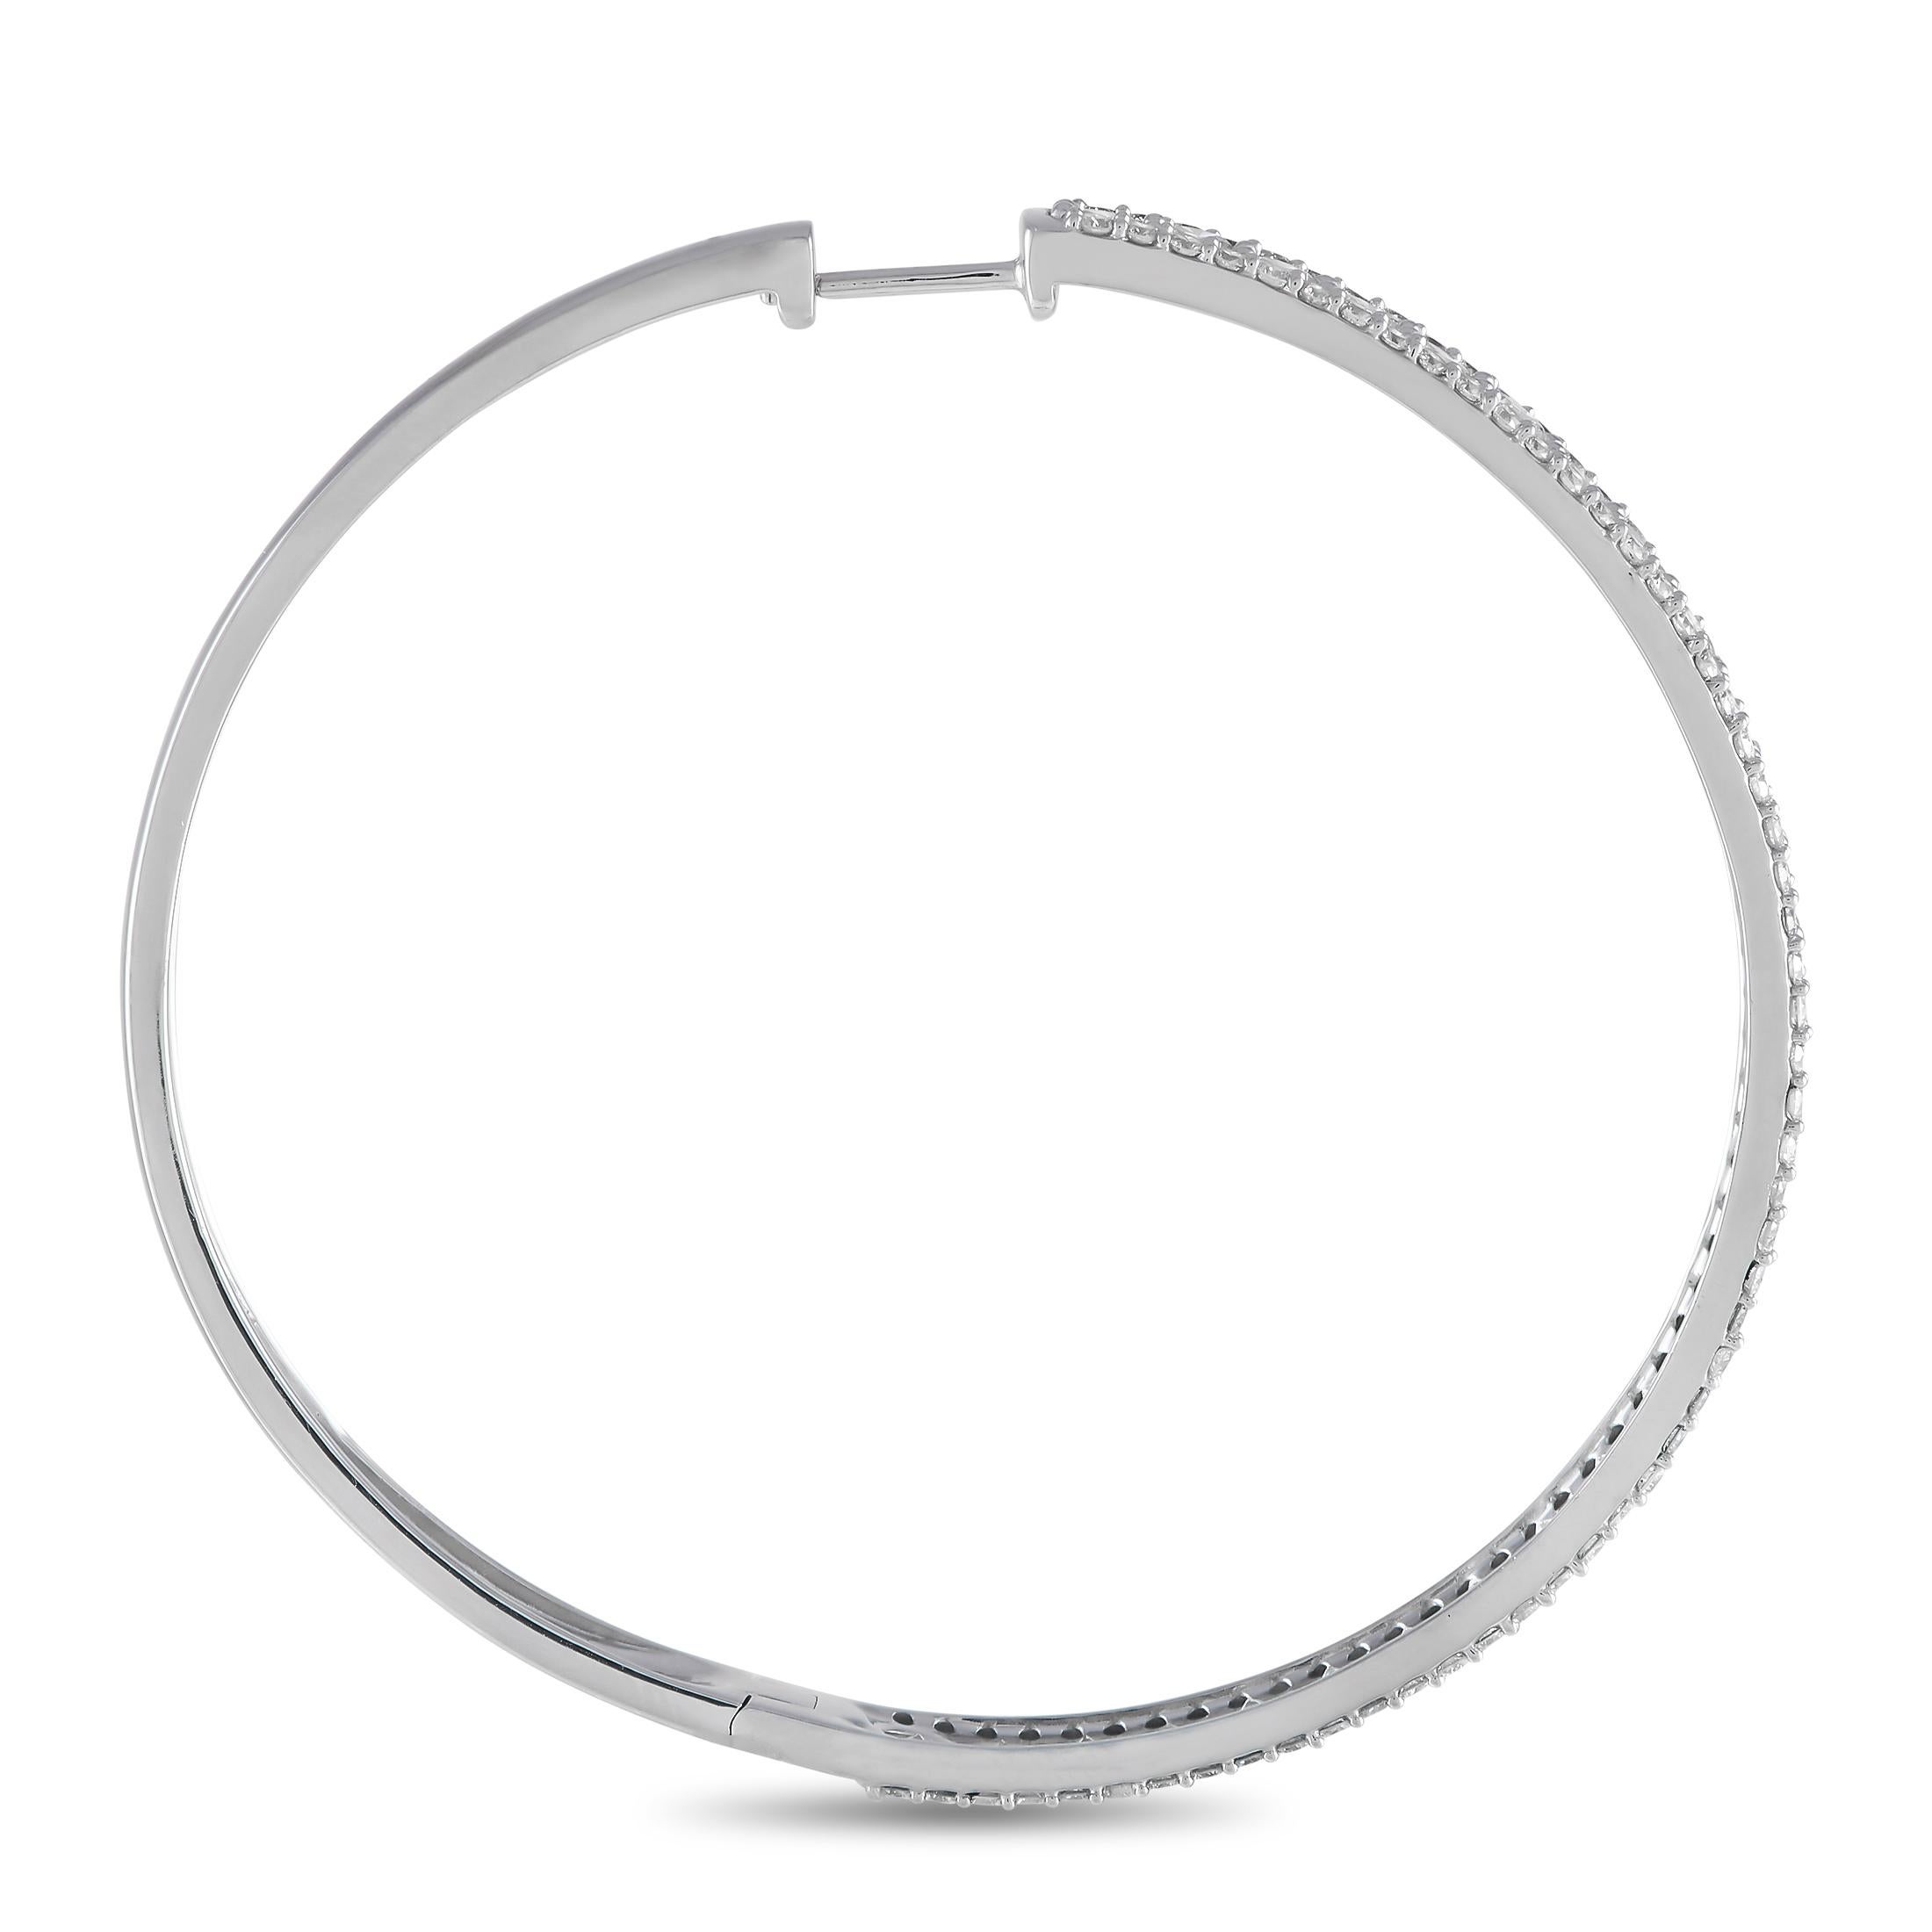 This stunner boasts a modern tapering hoop design lined with three rows of diamonds totaling 7.00 carats. With their graceful quality and stylish appearance, these diamonds hoop will prove themselves worthy to be in your rotation. Each earring